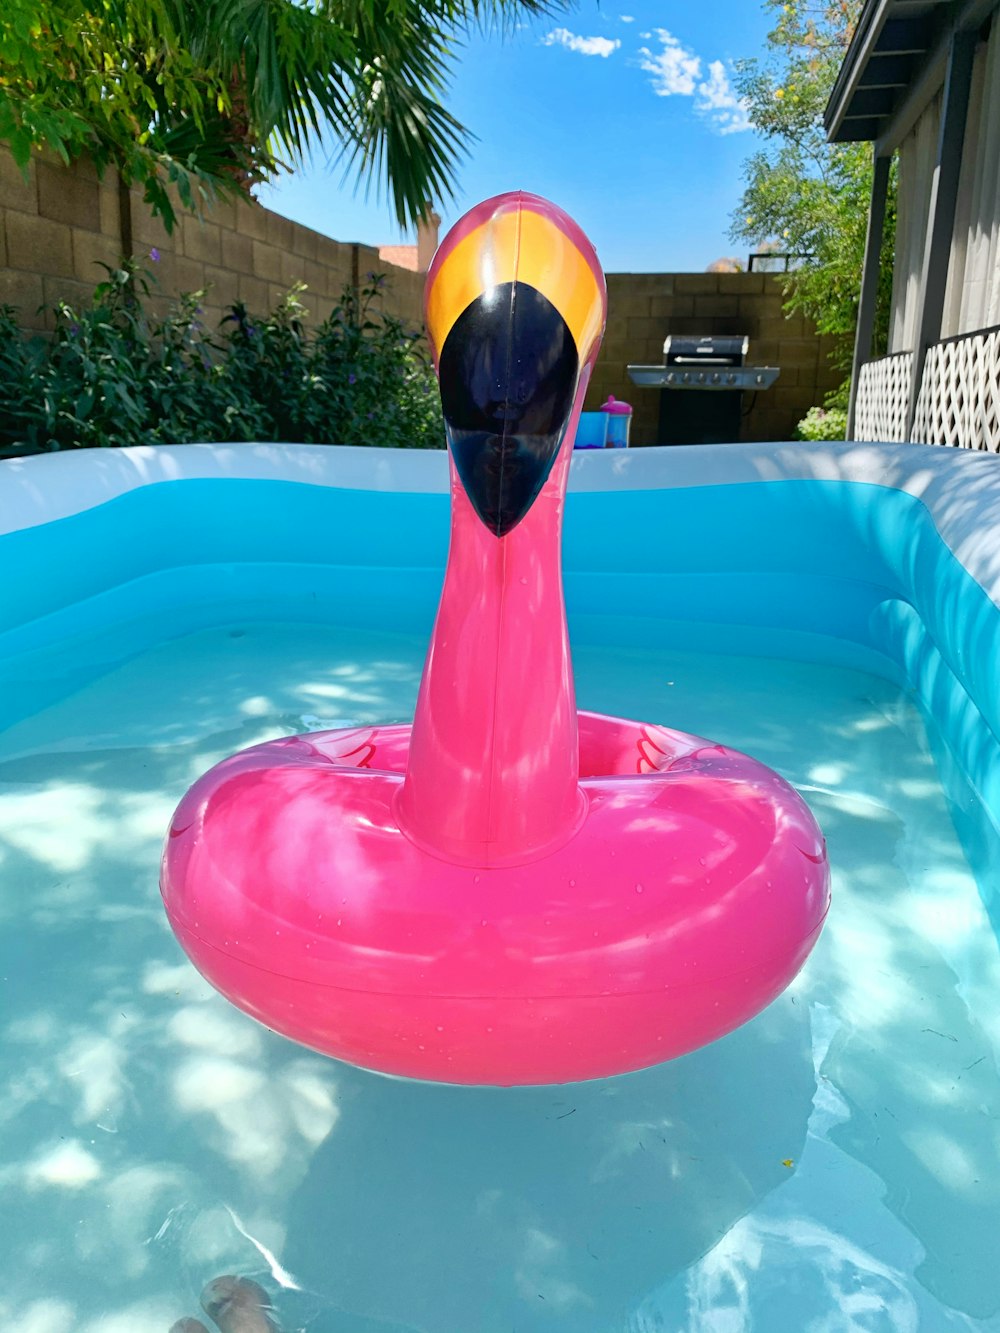 red and yellow inflatable duck on swimming pool